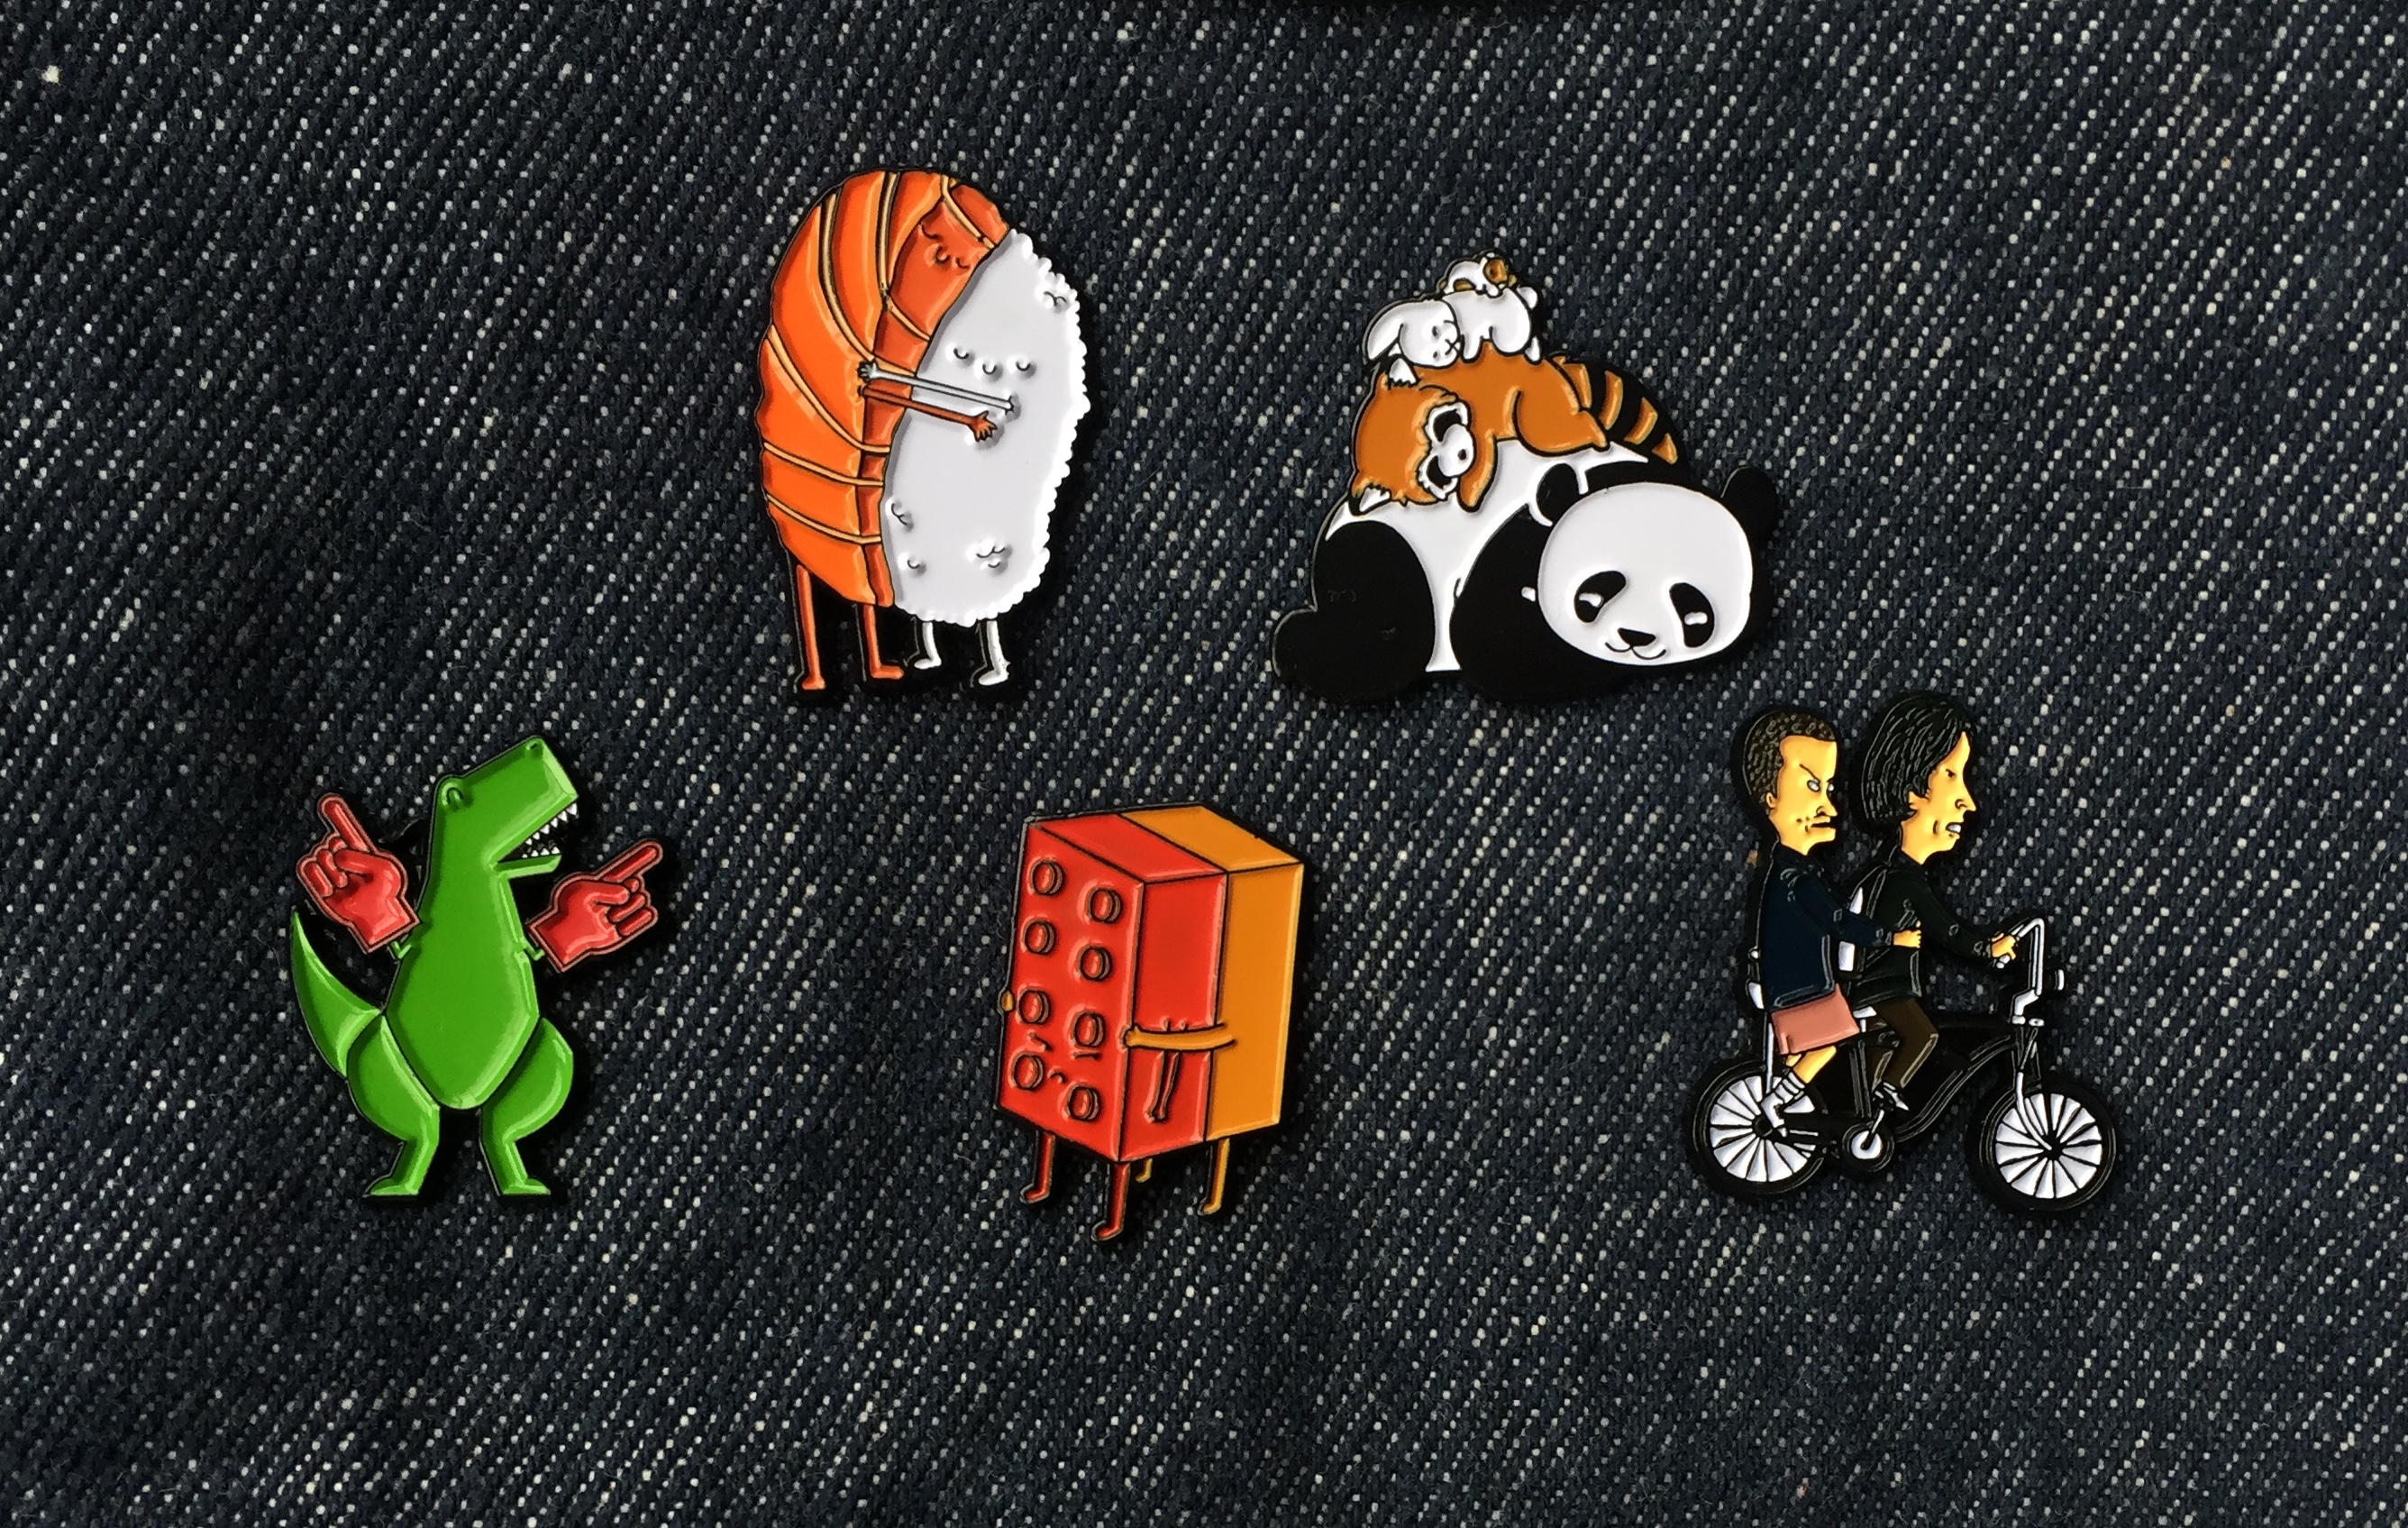 How Do You Rock Your Pins?